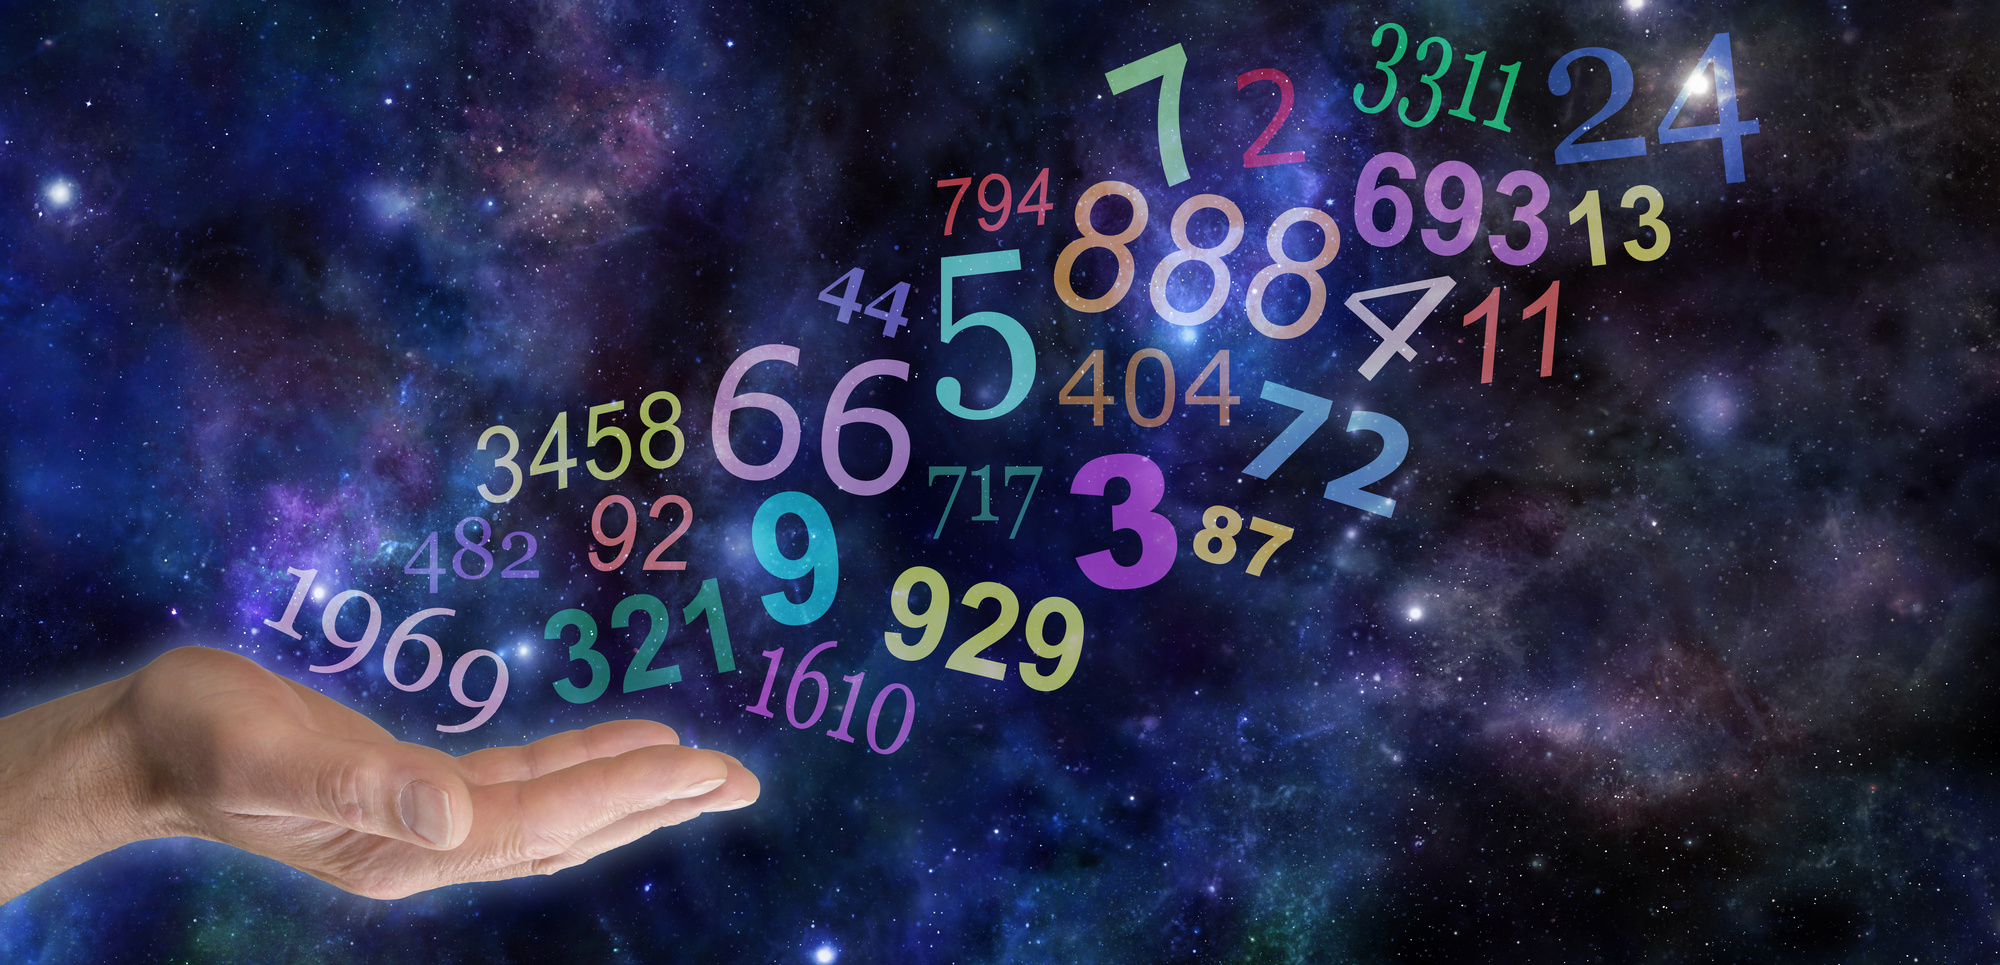 Numerology: What Is The Personal Quarter?